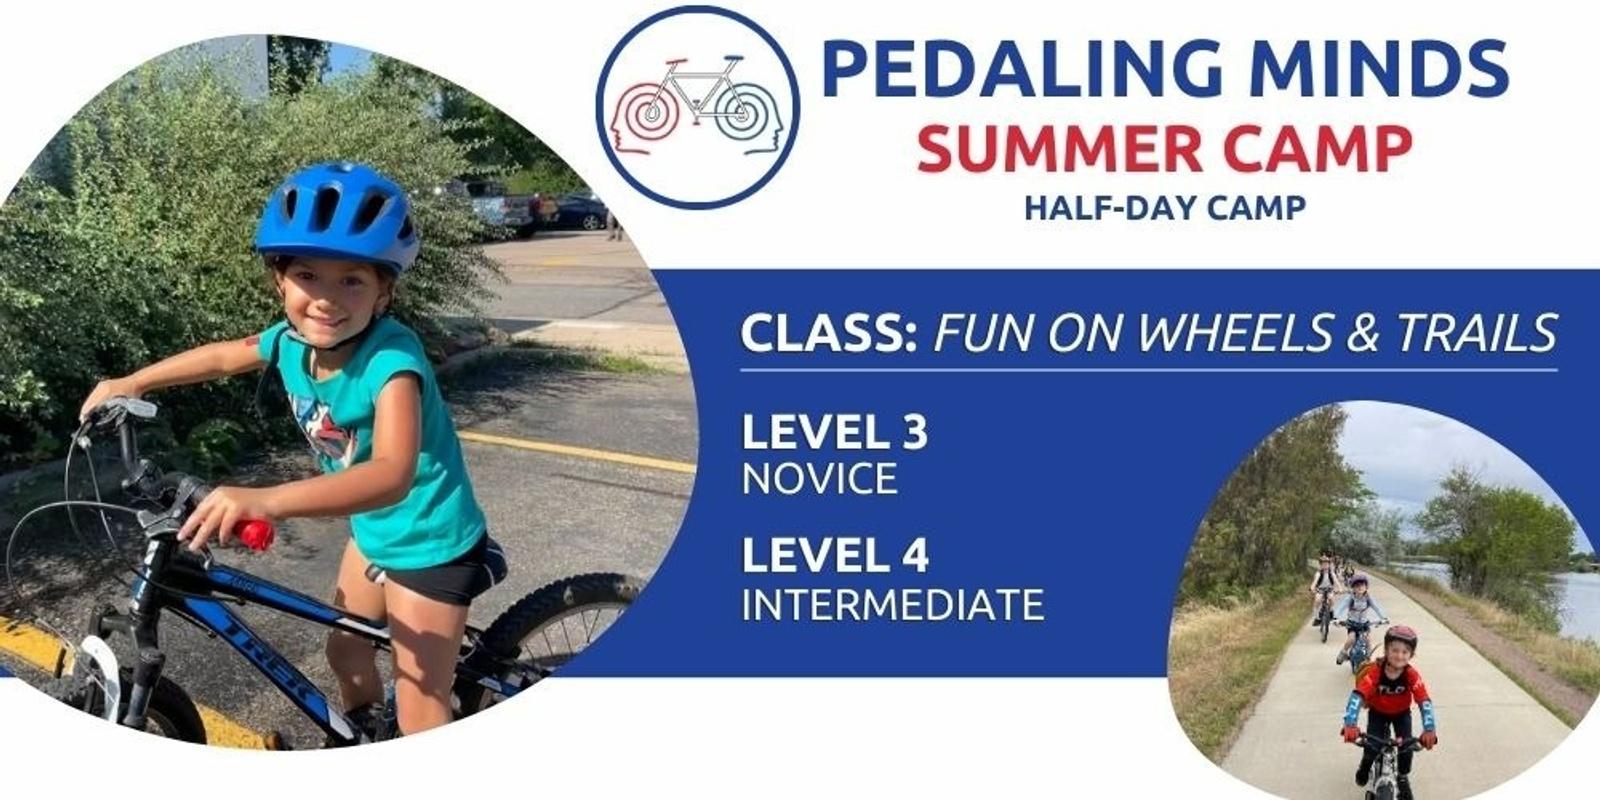 Summer Camp - Fun on Wheels and Trails!